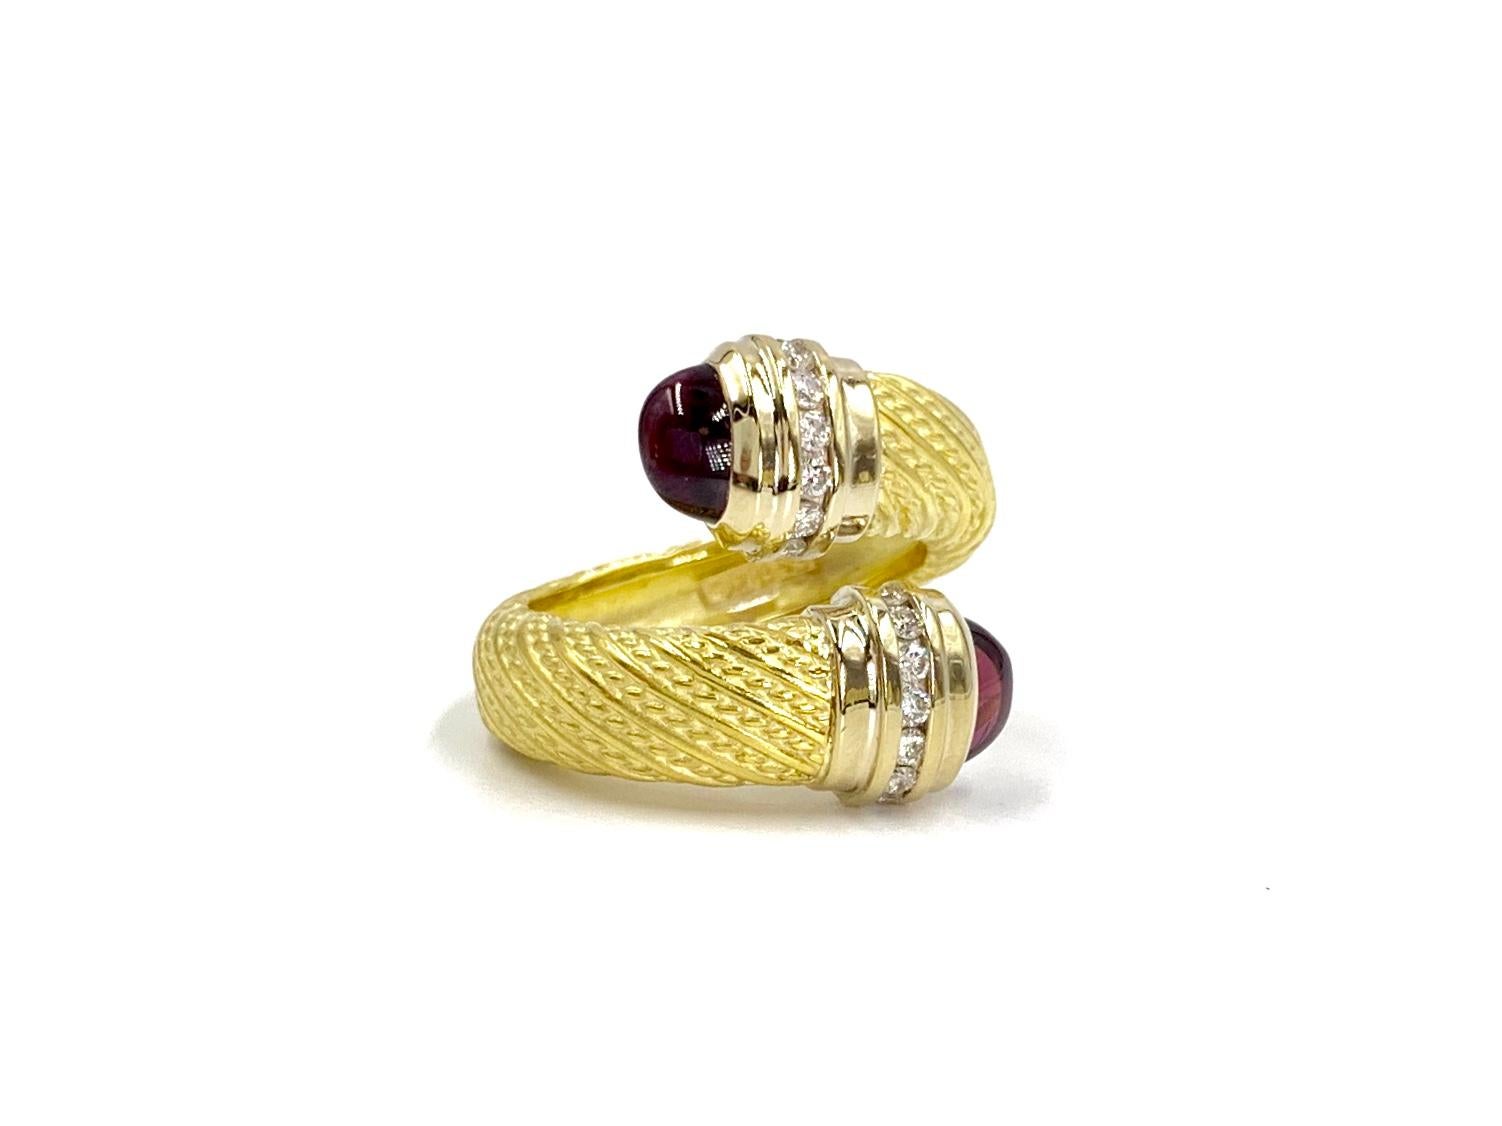 Made with extraordinary craftsmanship by Seidengang jewelry company. This 18 karat hand carved bypass wrap style ring features two cabochon rhodolite garnet caps and .20 carats of round brilliant diamonds. Diamond quality is approximately G color,